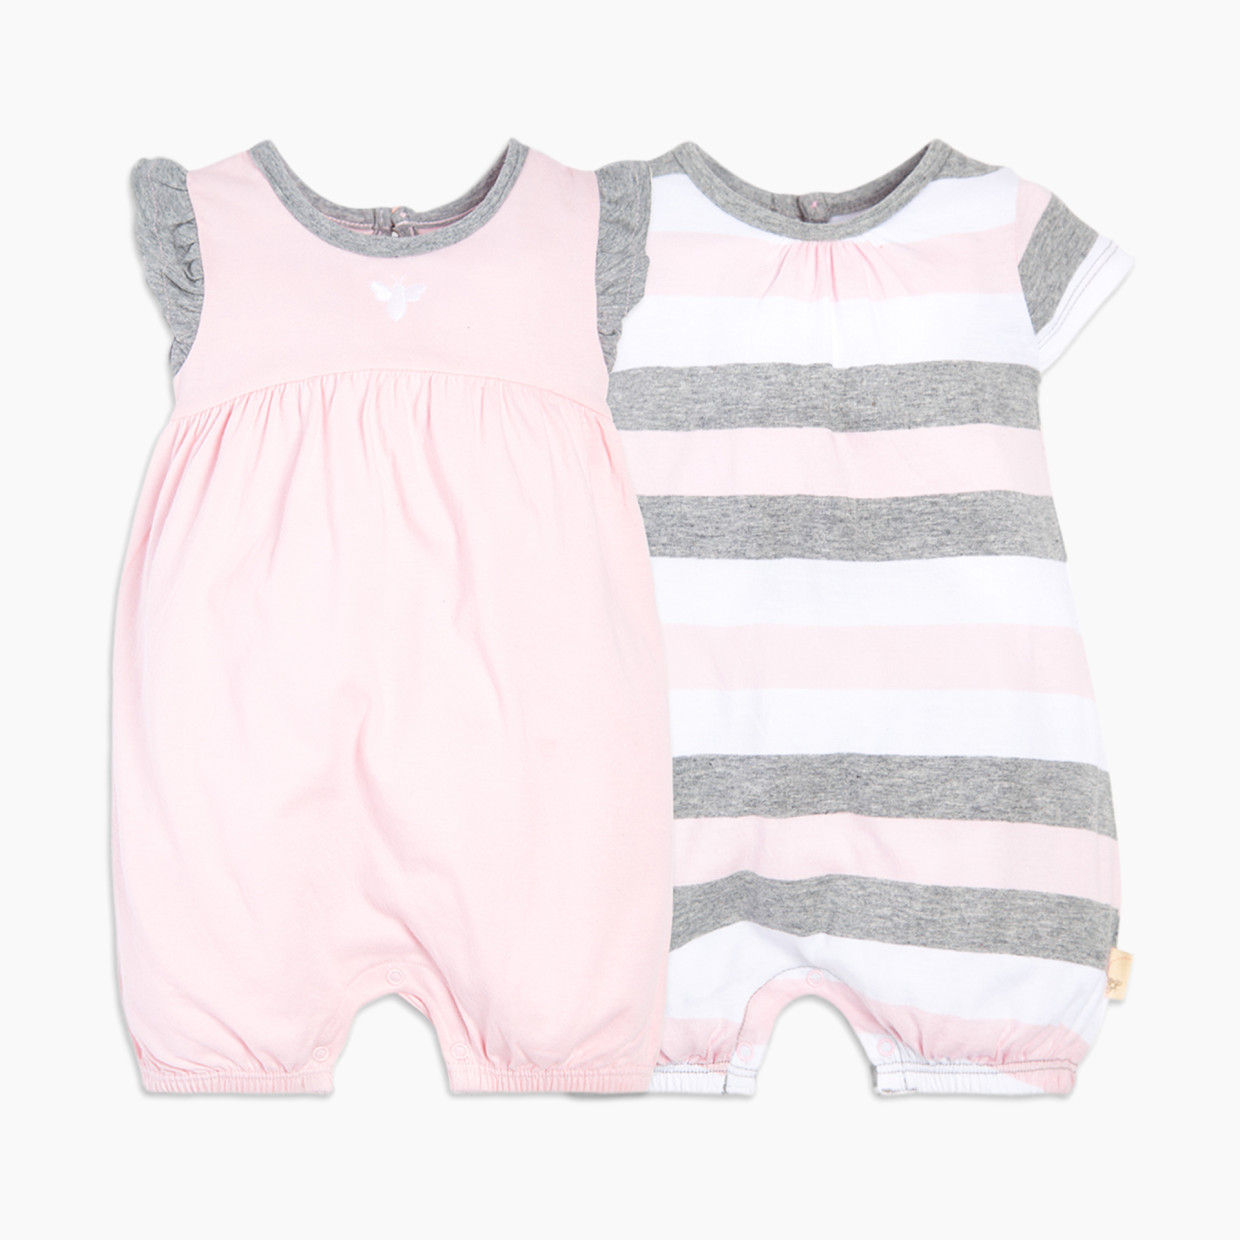 Burt's Bees Baby 2 Pack Rompers - Blossom Multi Stripe, 0-3 Months.